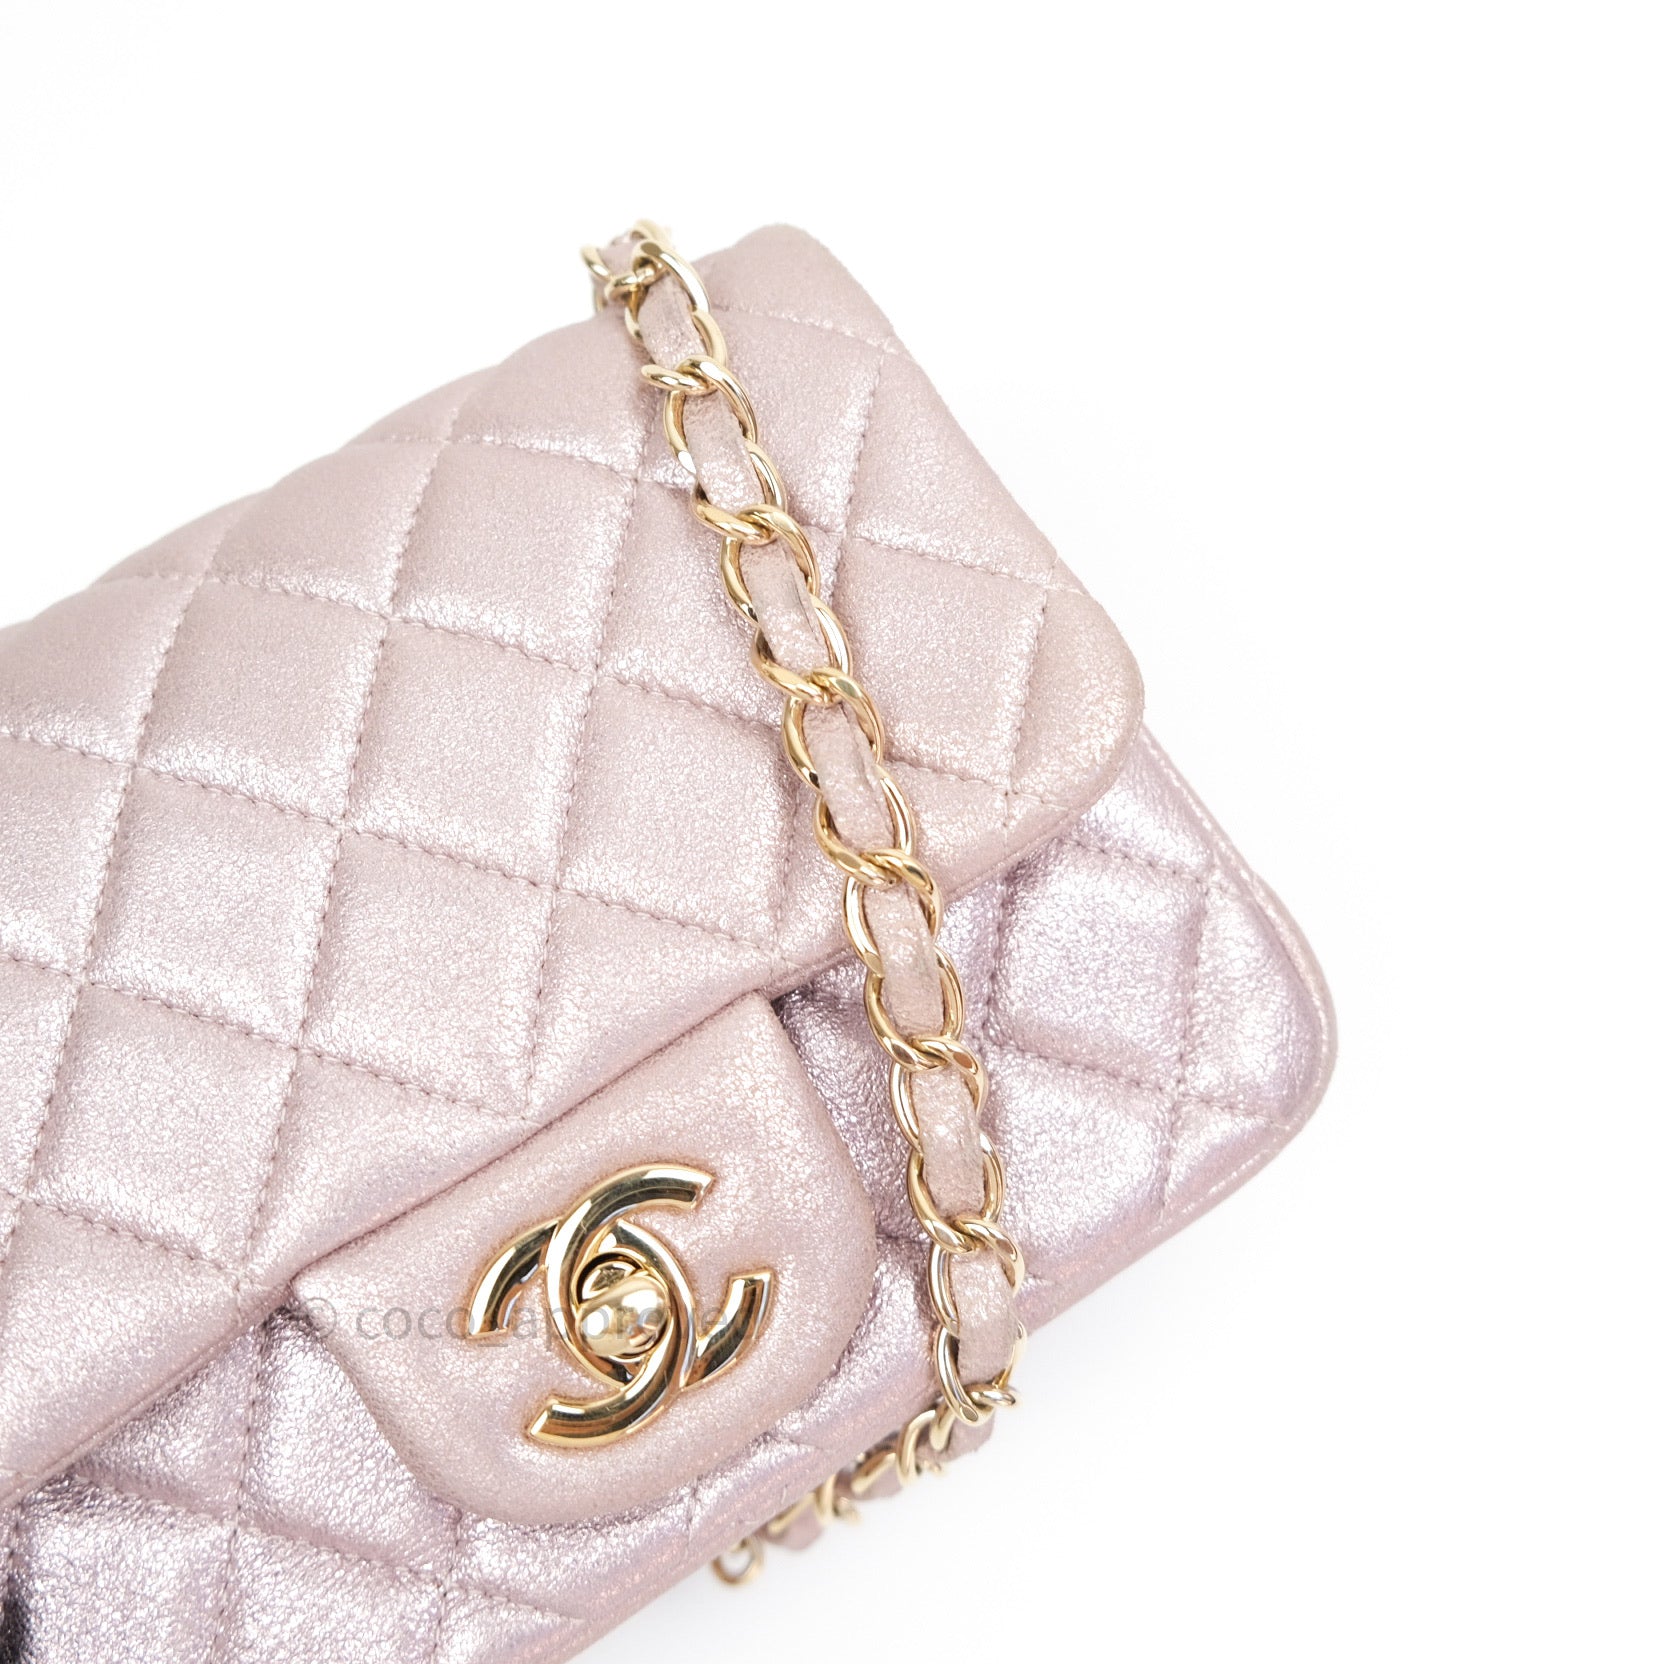 Chanel Small Classic Flap CF in Black Lambskin and Rose Gold HW